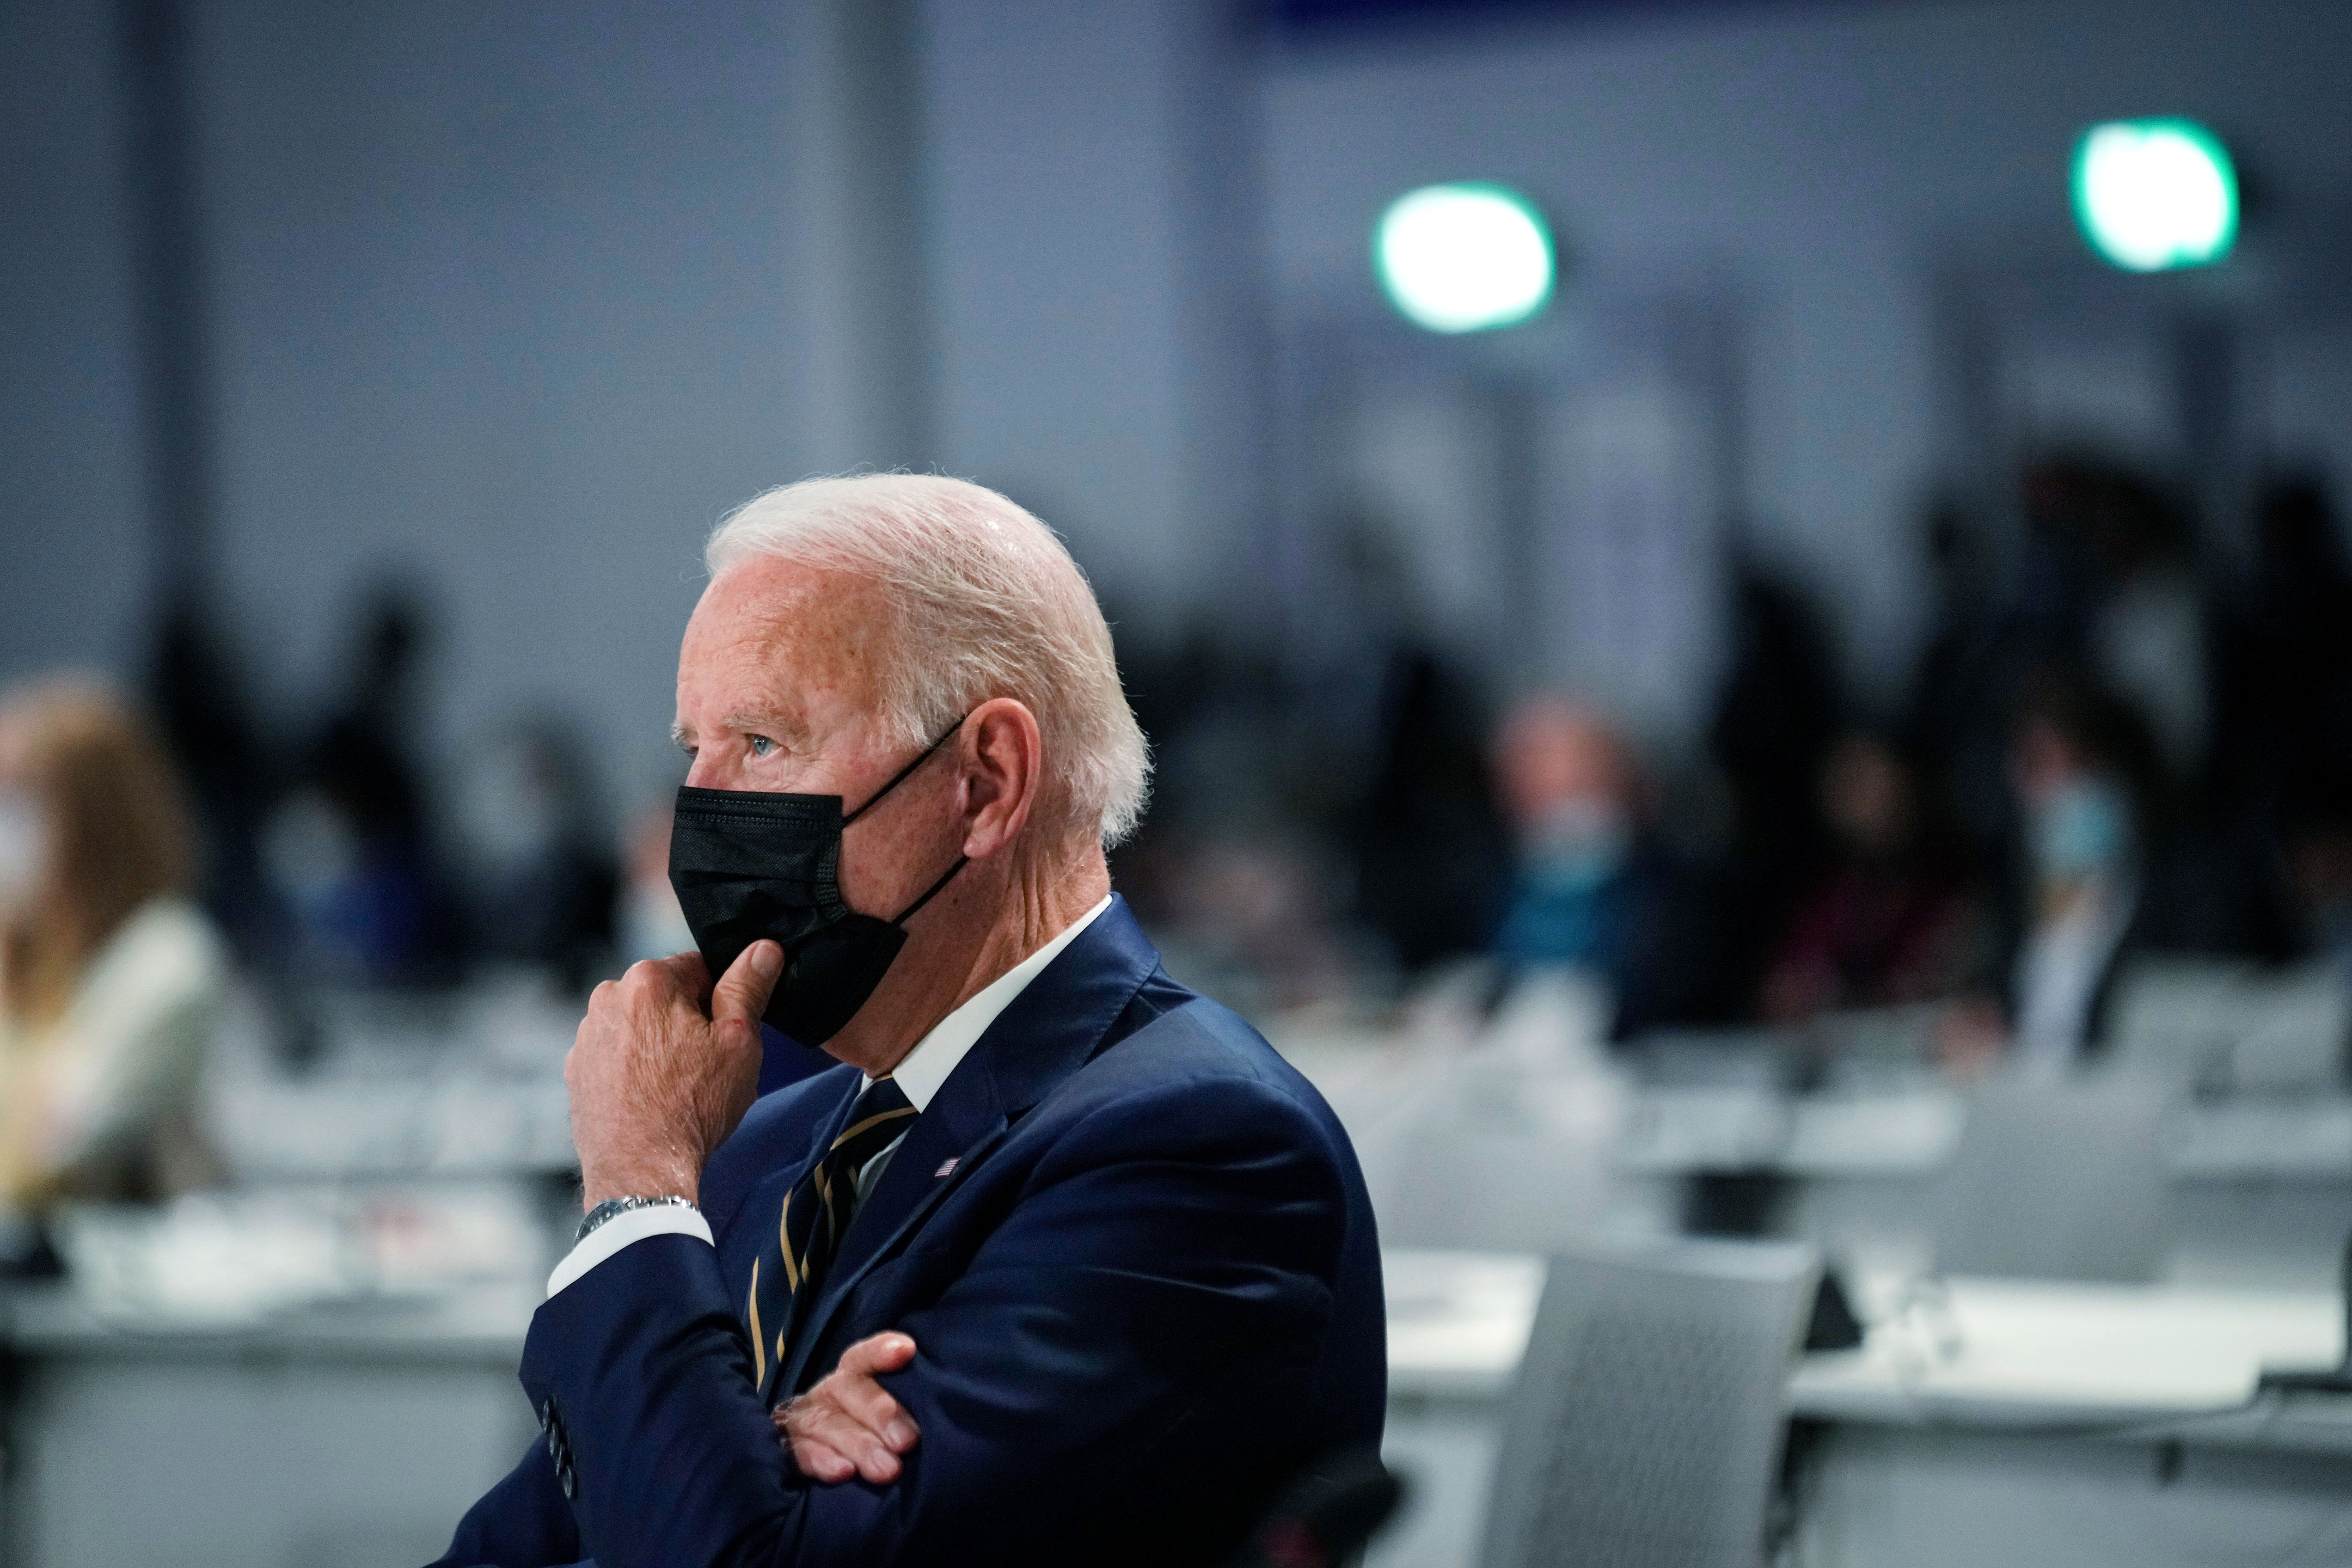 US President Joe Biden attends the opening session of COP26 in Glasgow, Scotland, on November 1.